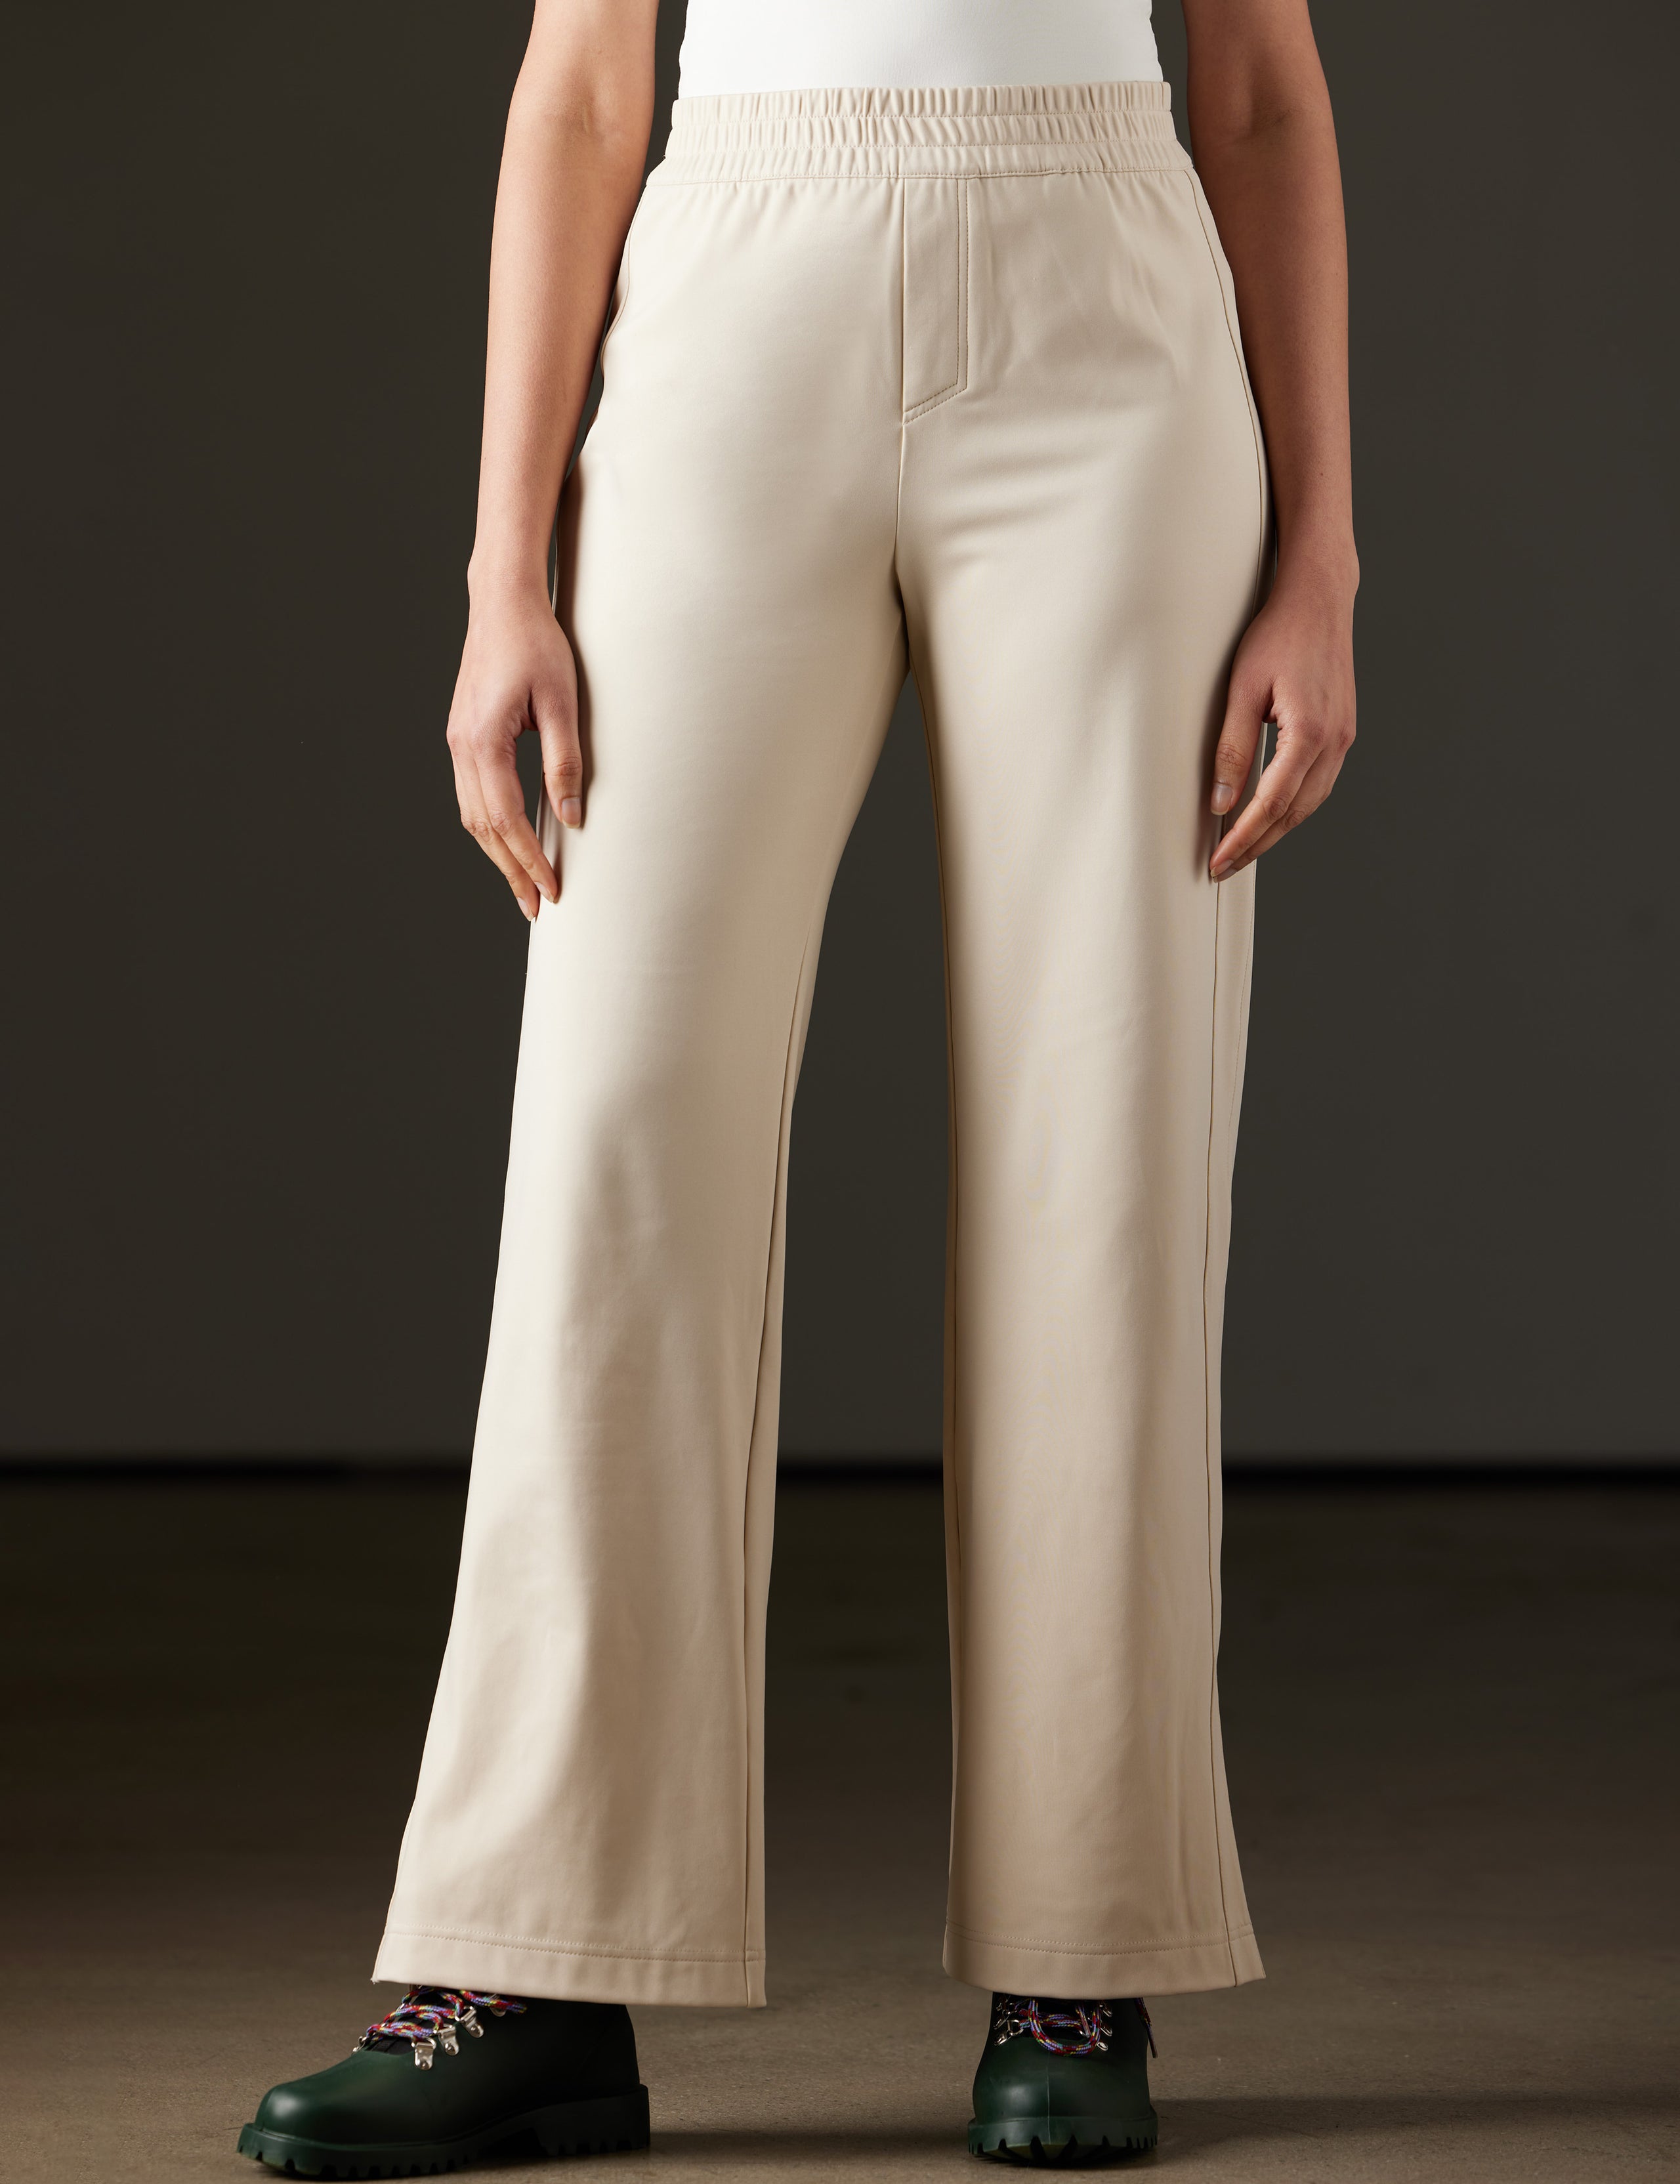 Women's white travel pant from AETHER Apparel